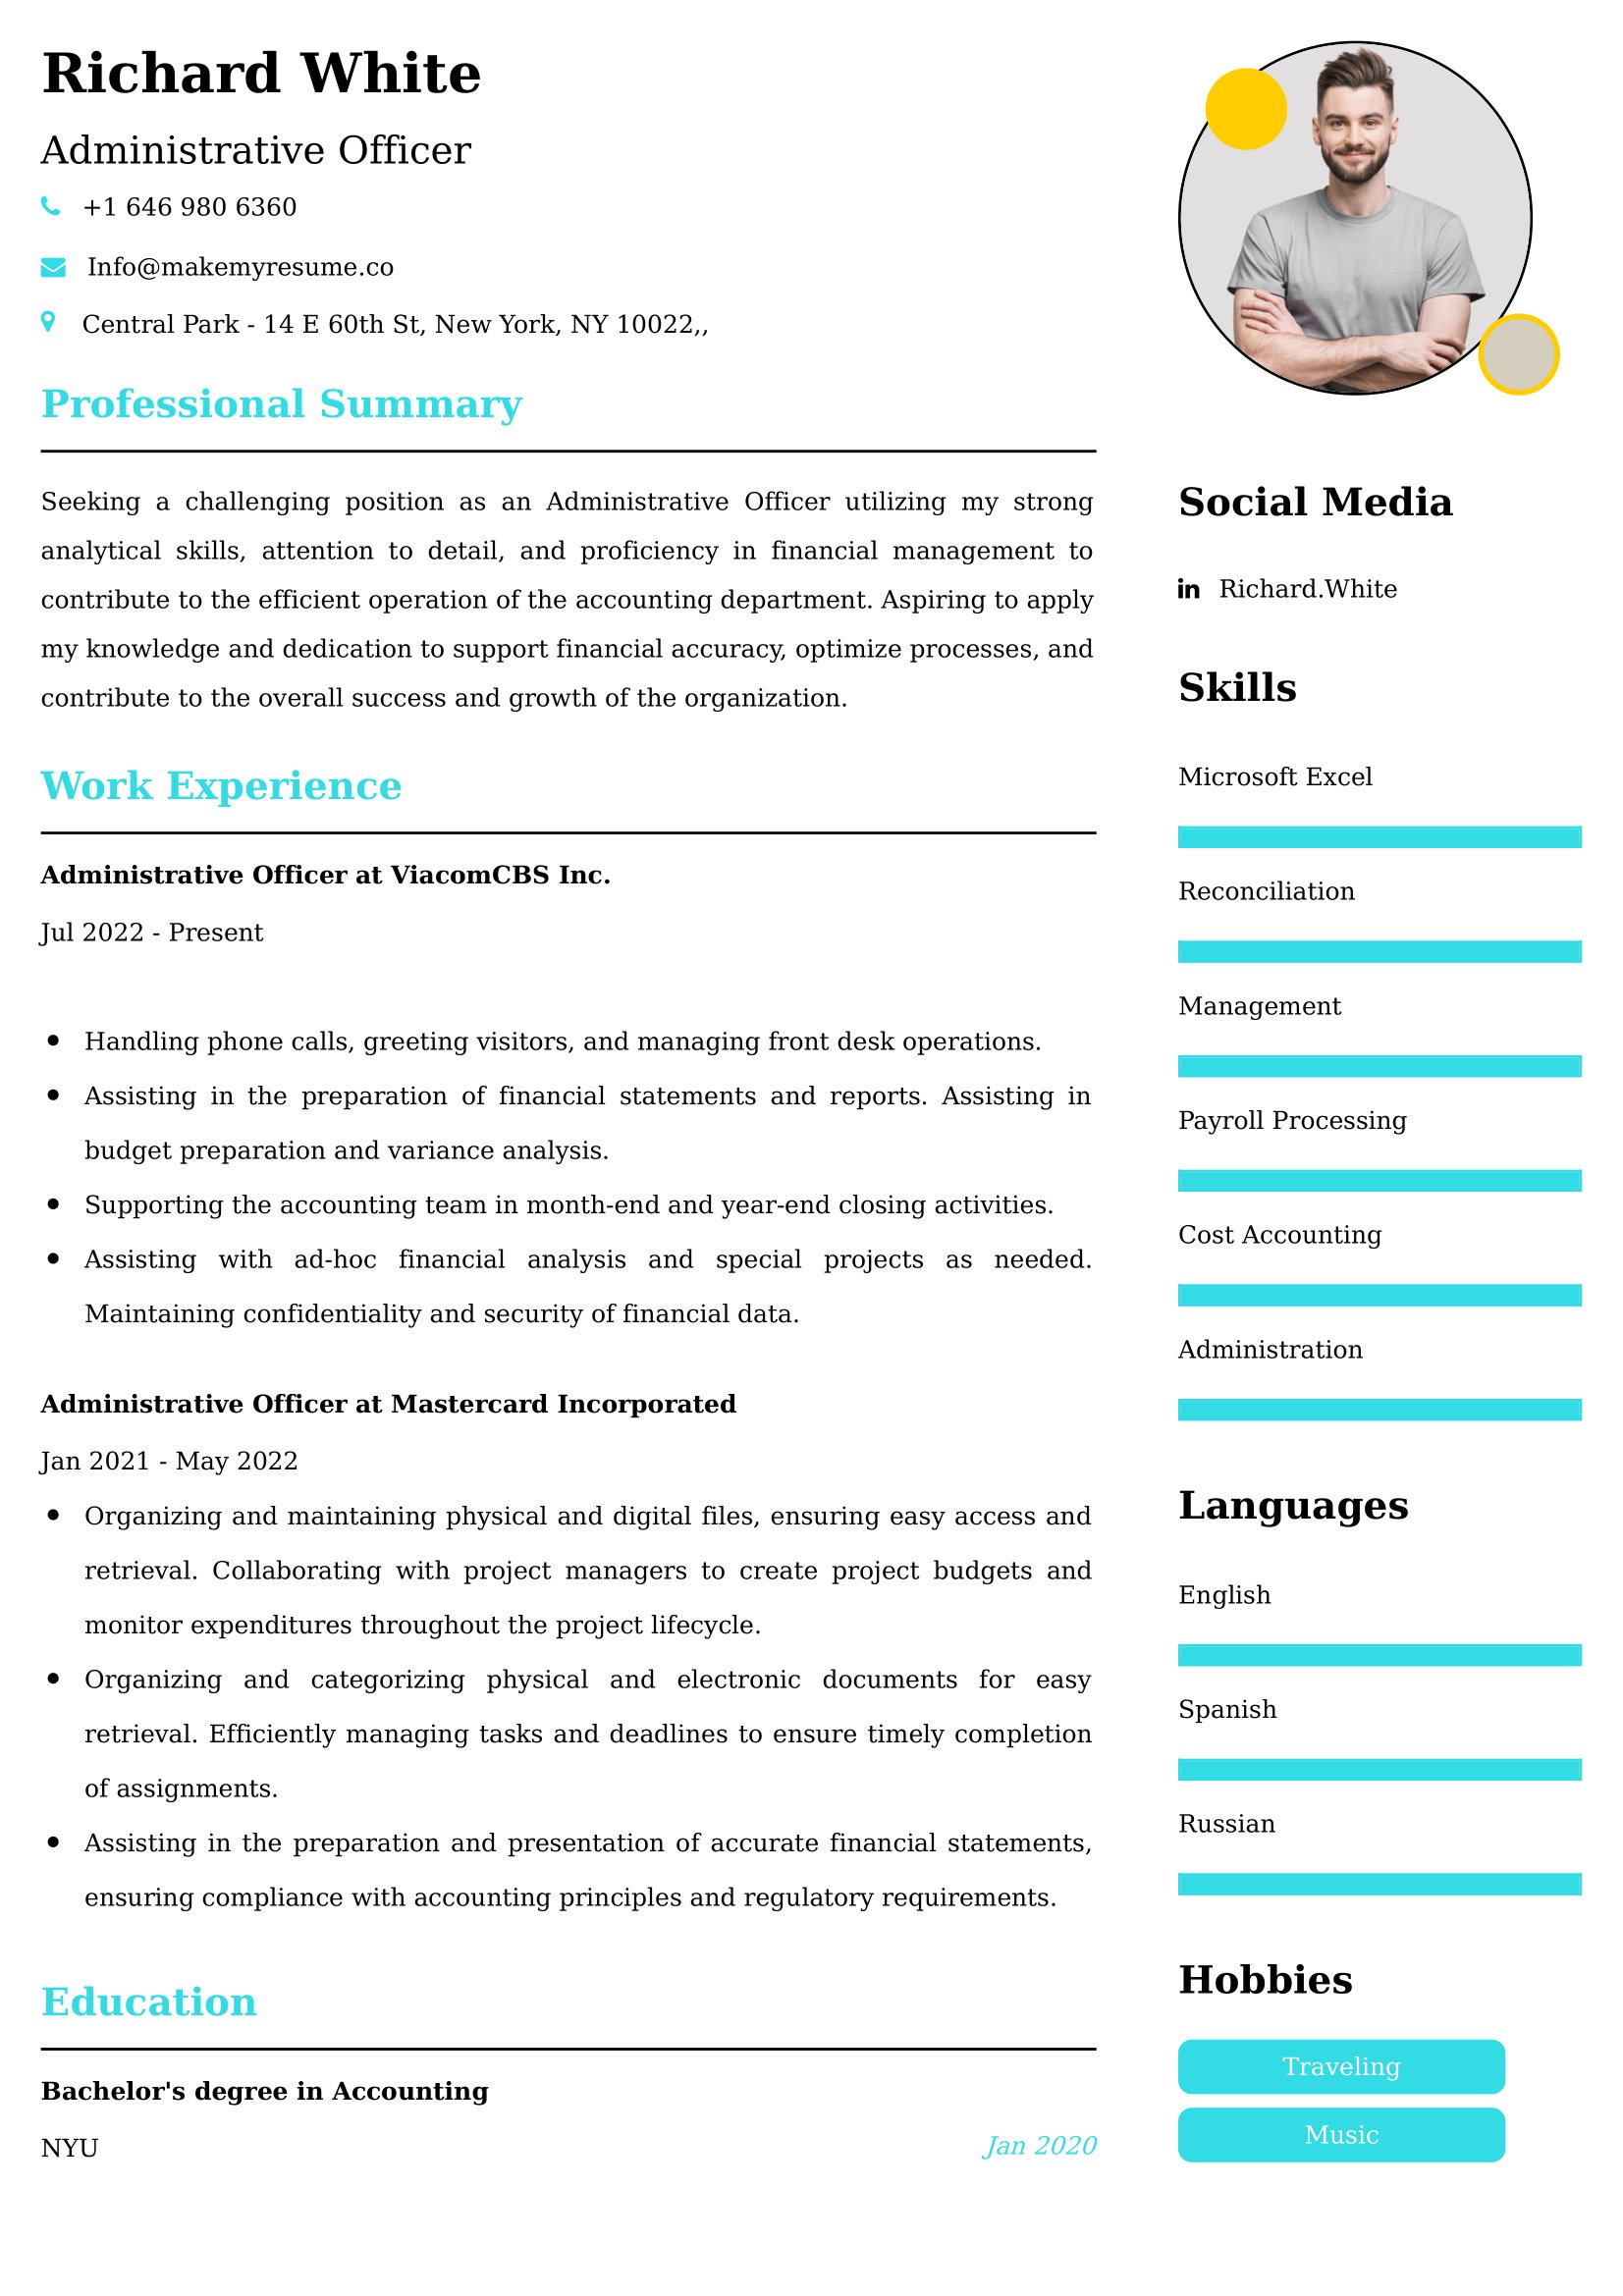 Administrative Officer Resume Examples - UK Format, Latest Template.